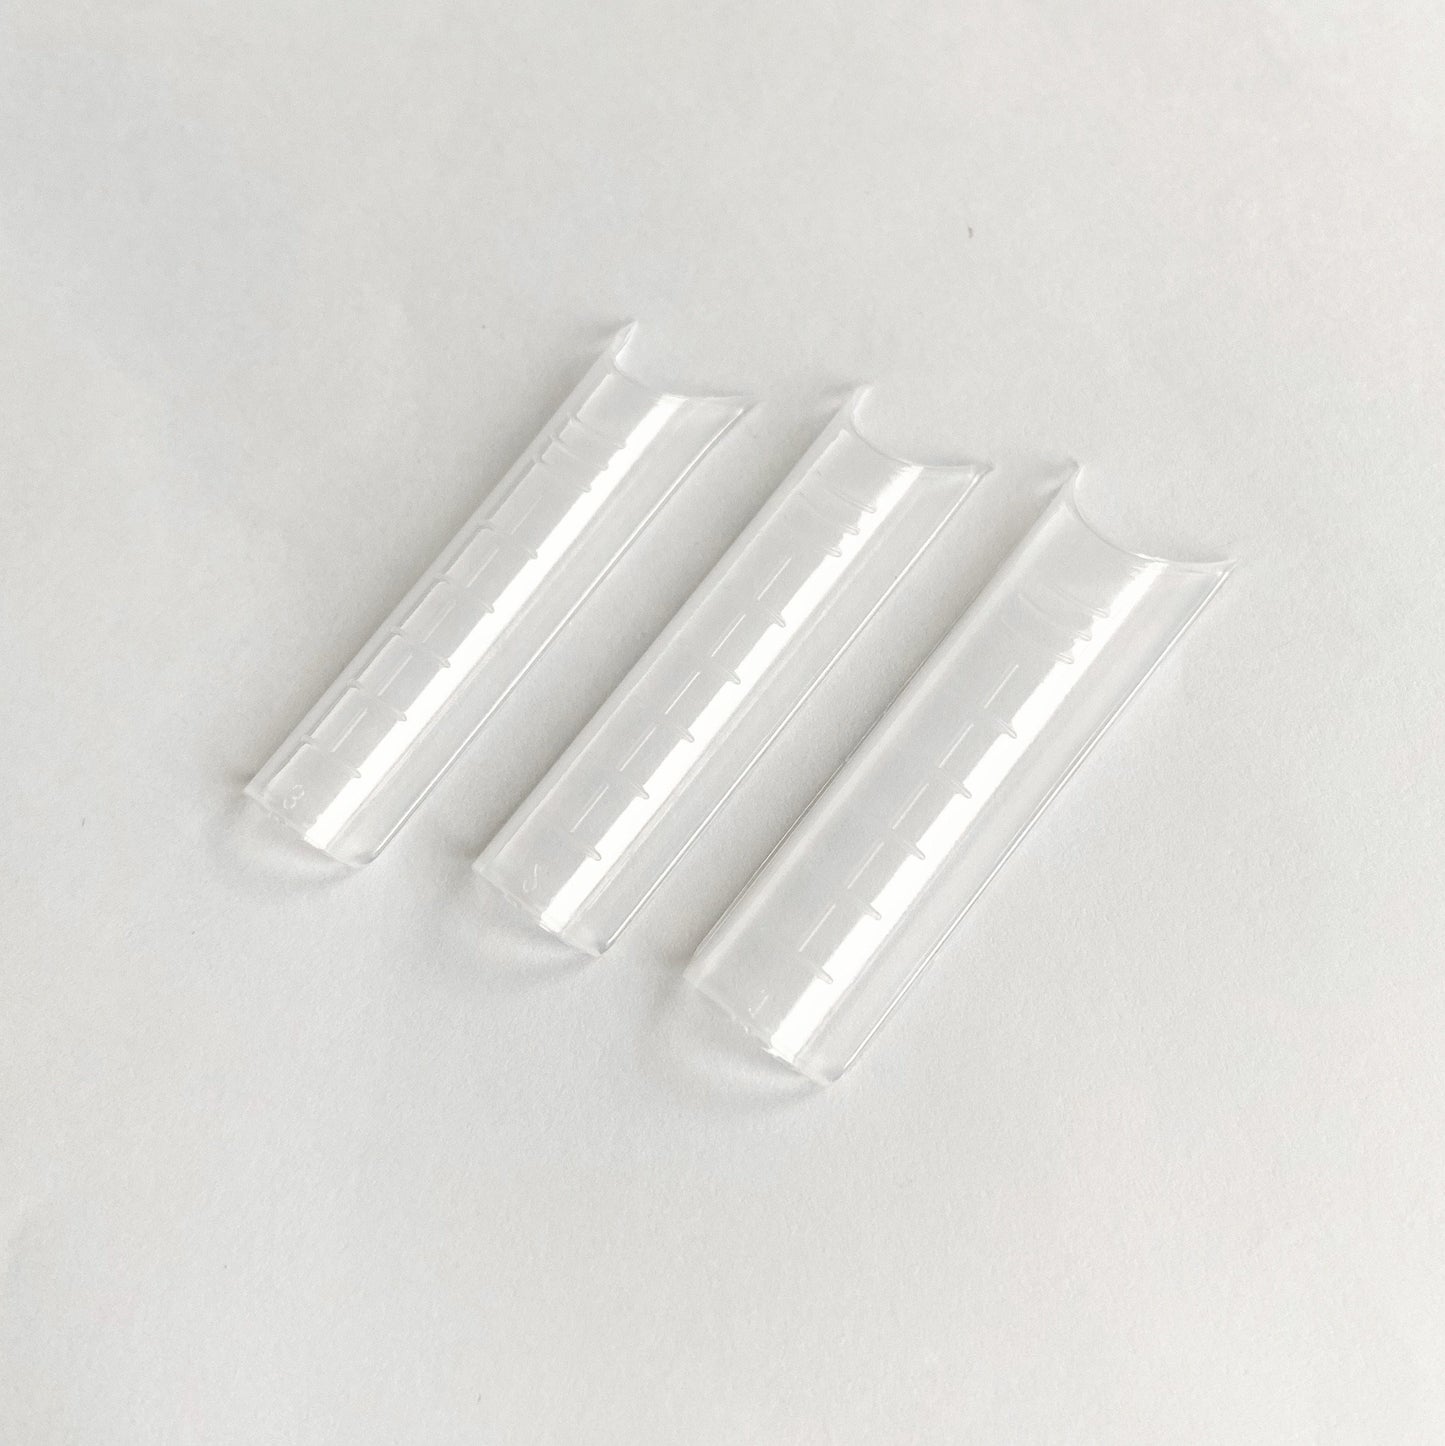 Dual Nail Forms #2 clear for acrygel, polygel, 120 pc